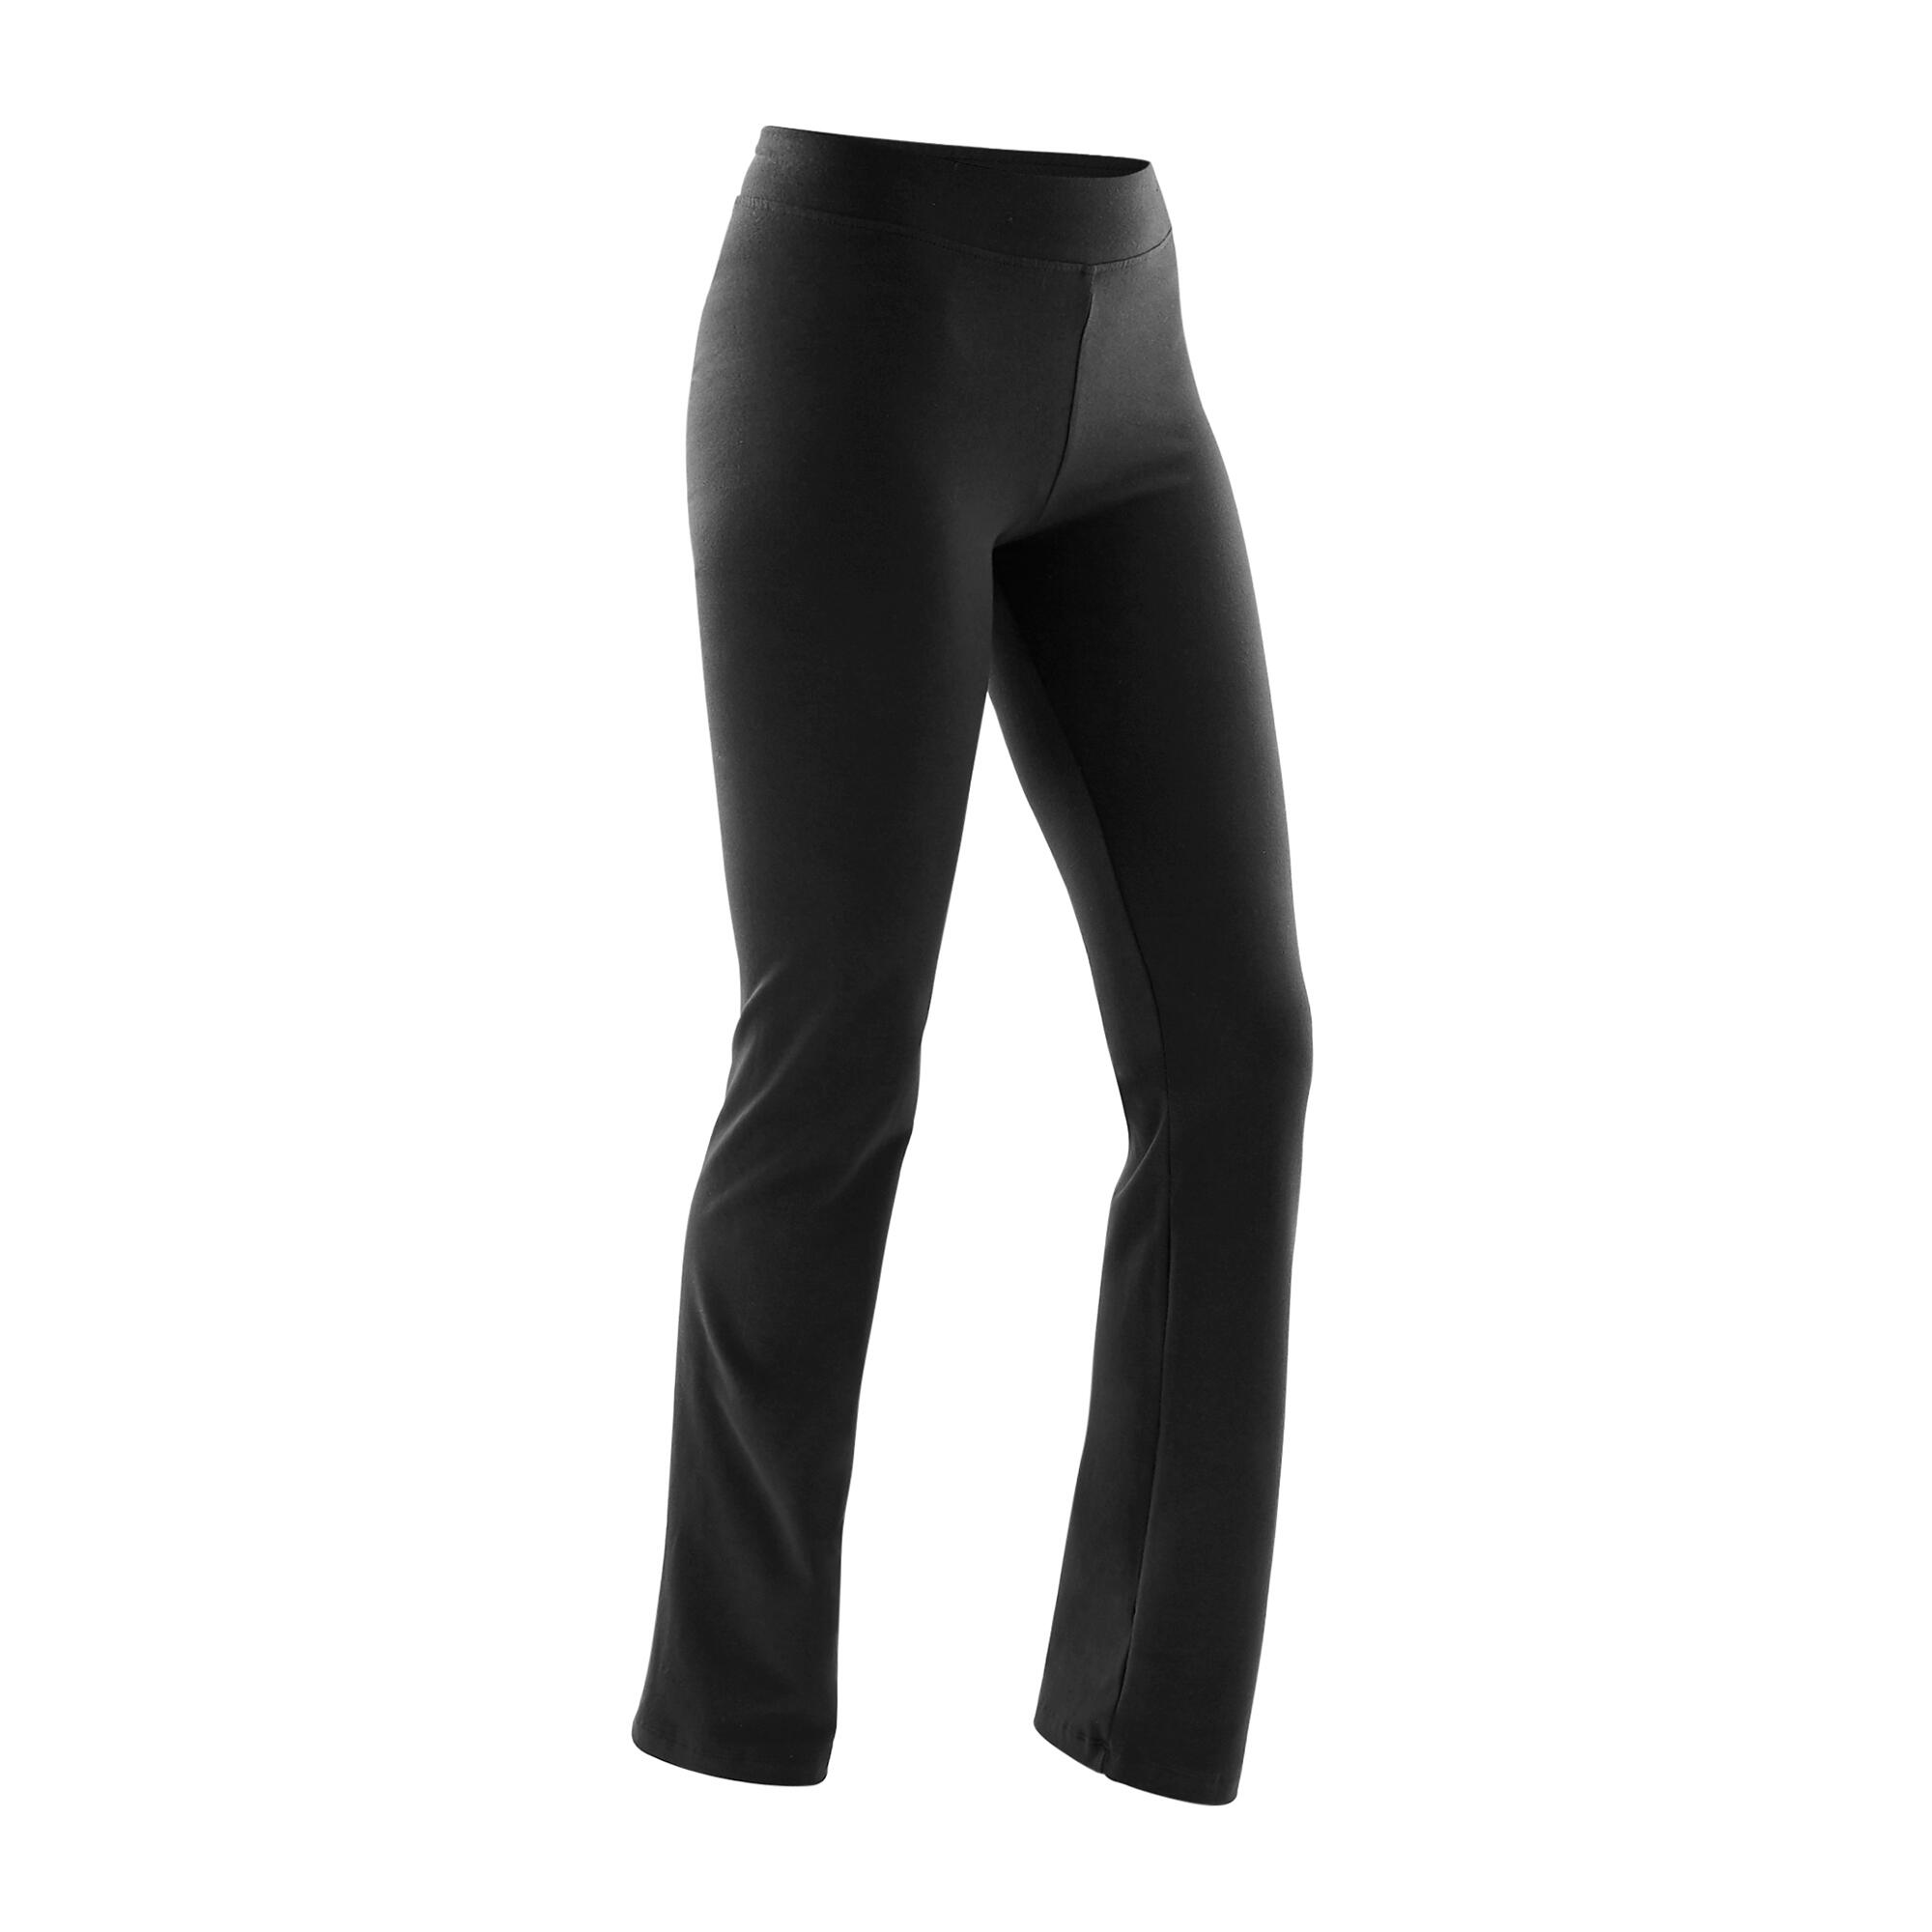 Top 92+ decathlon gym trousers super hot - in.cdgdbentre